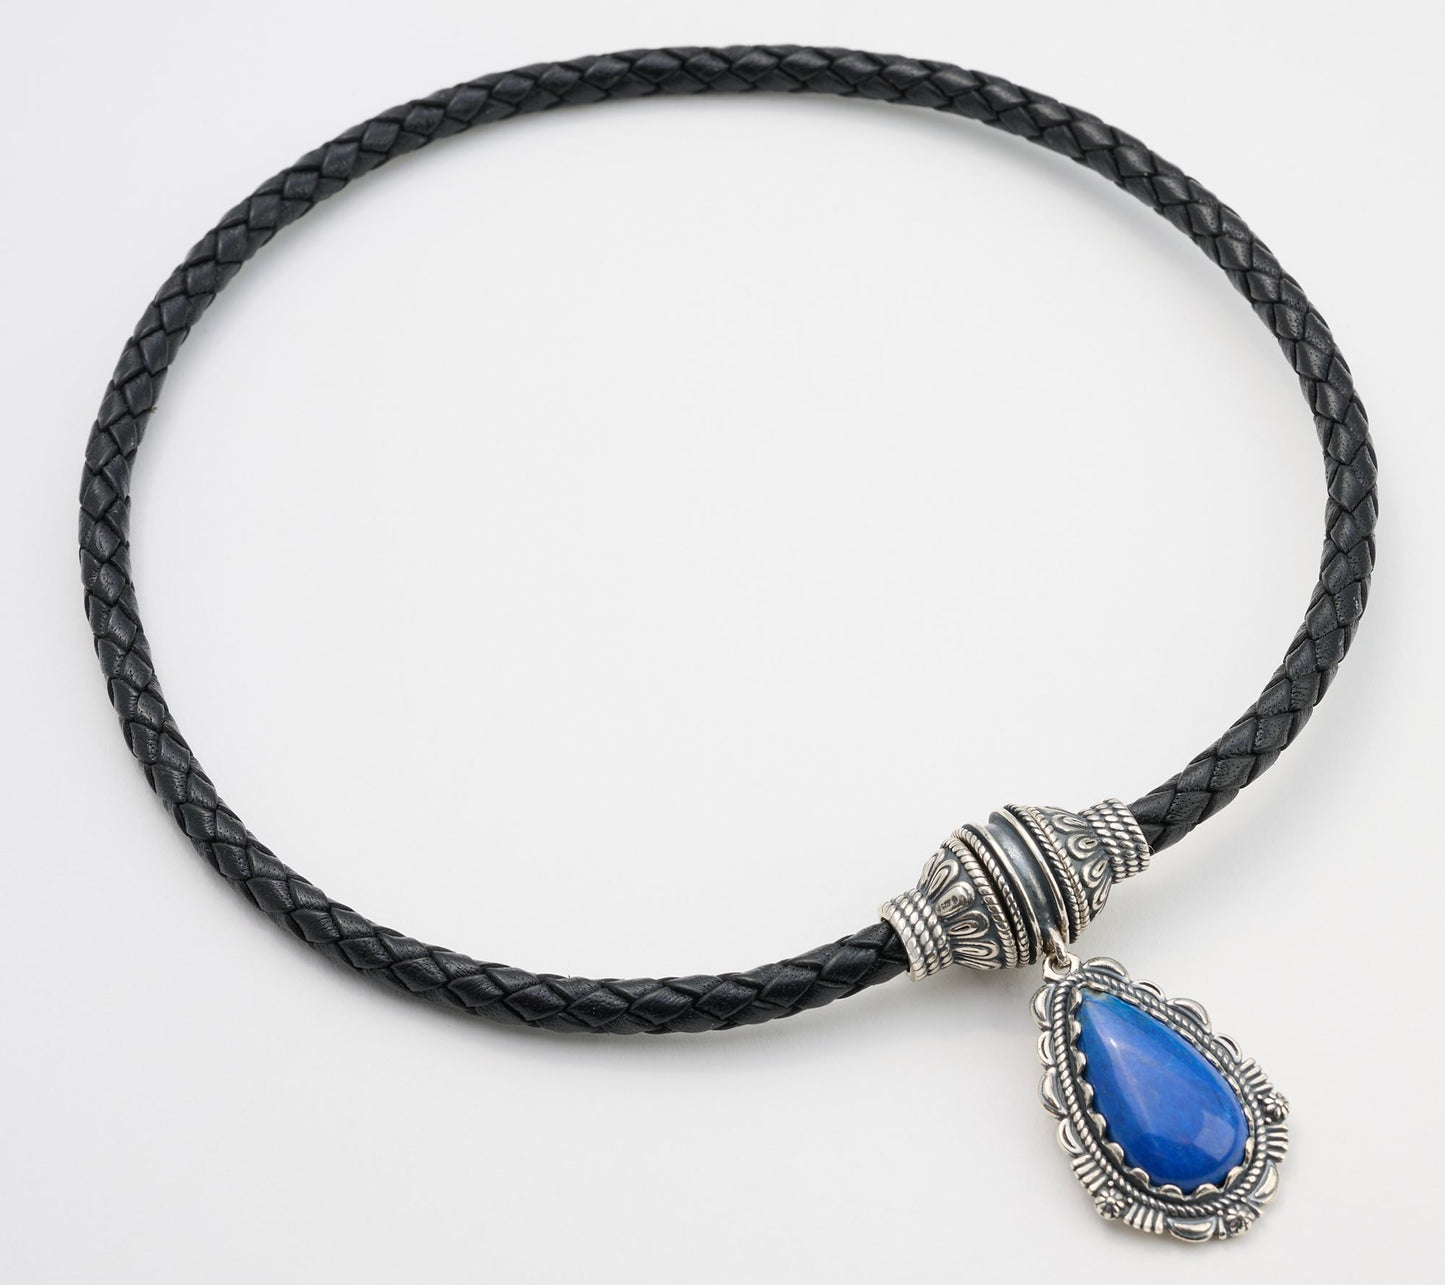 American West 17" Blue Lapis Braided Leather Necklace